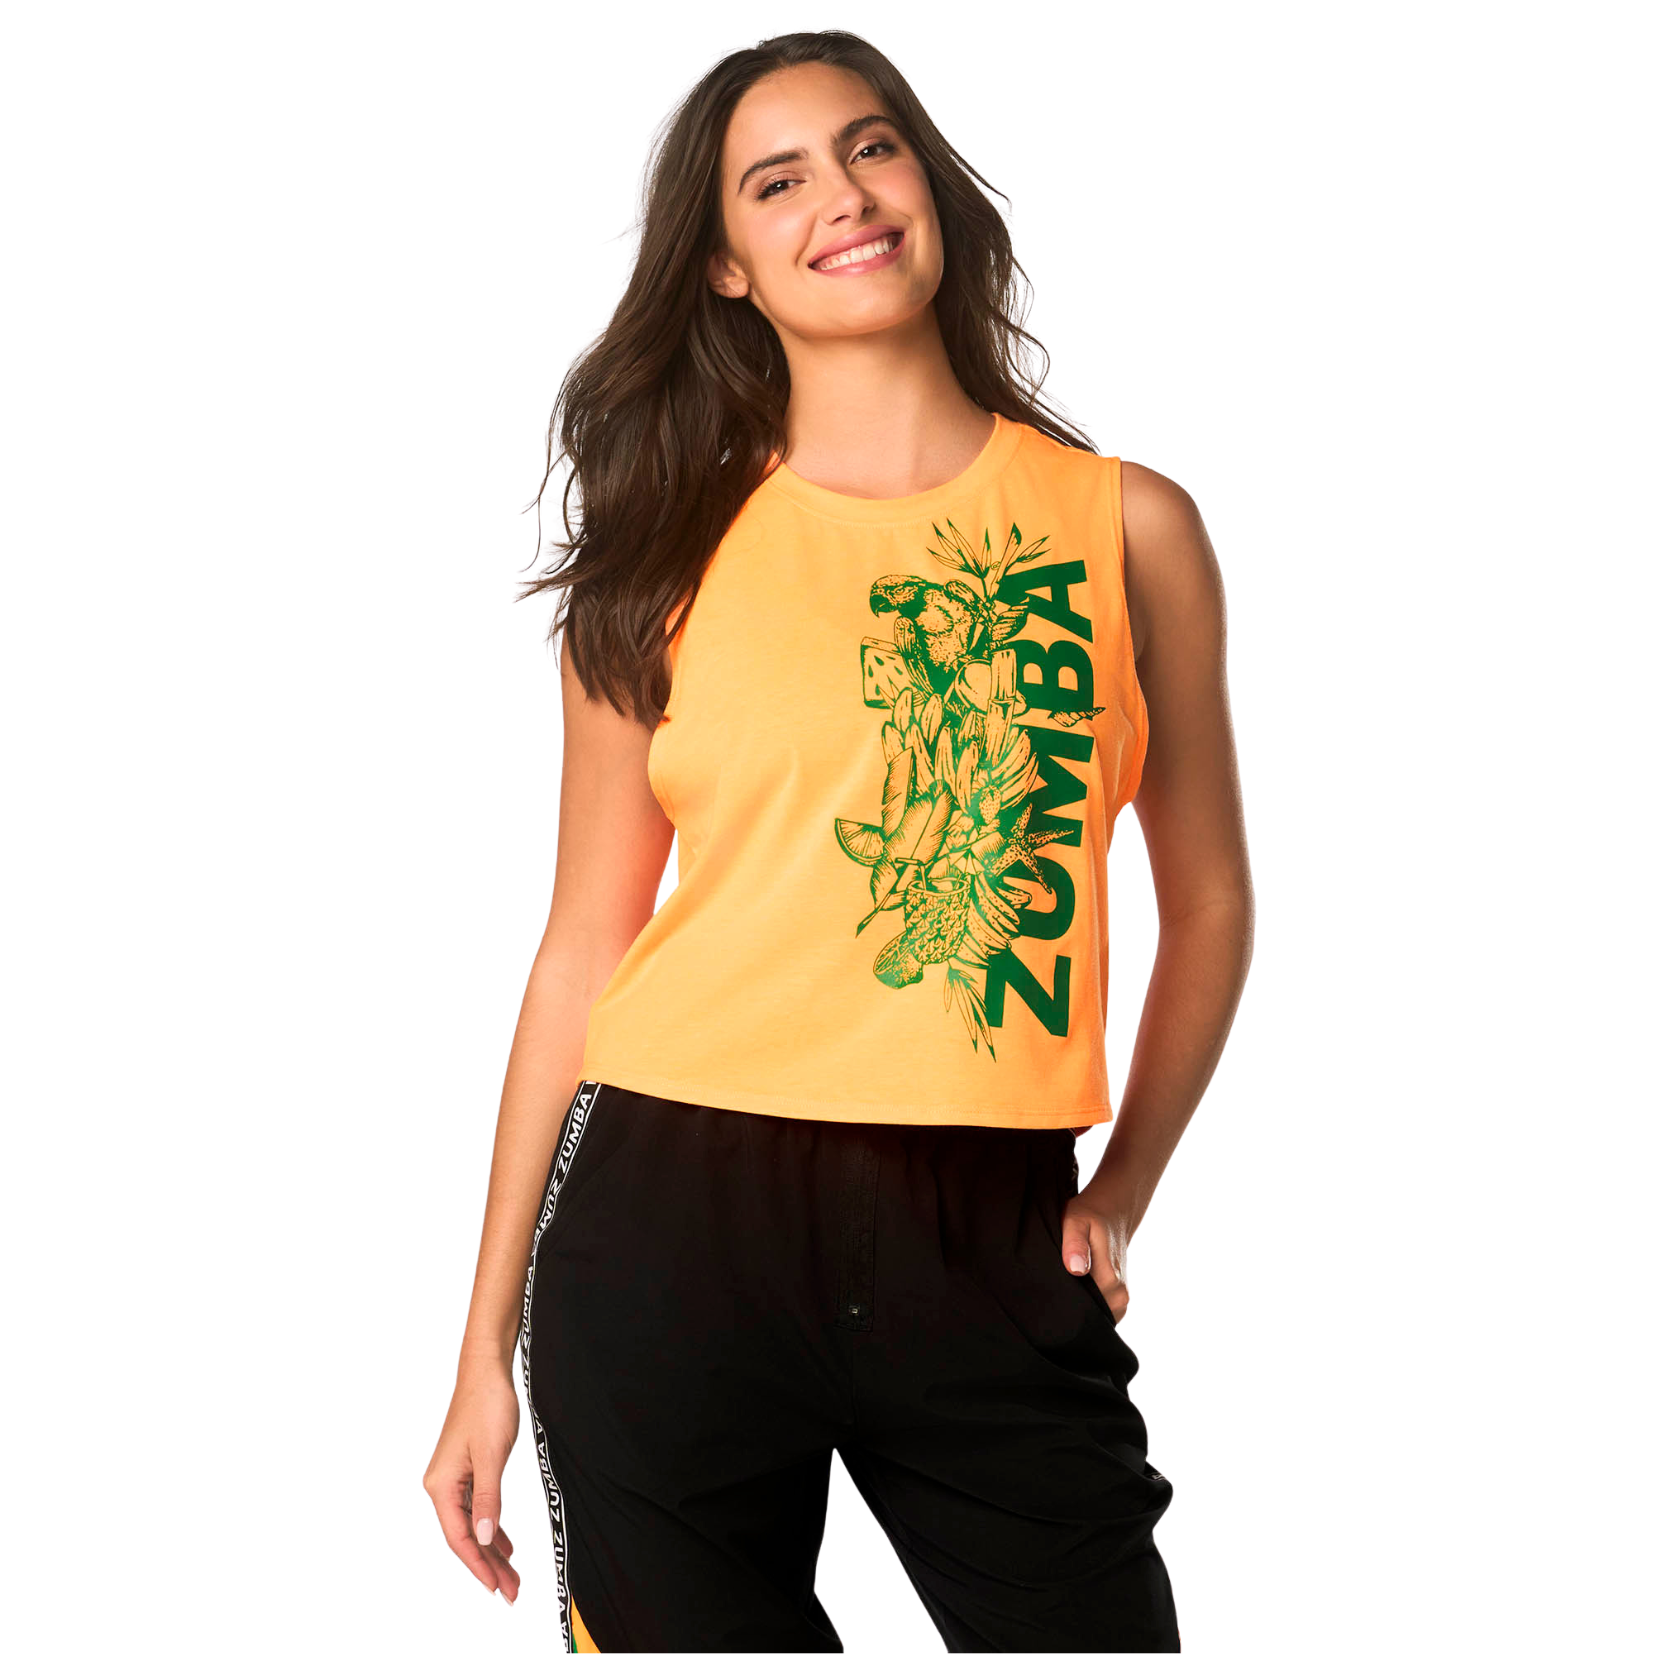 Zumba Tropics High Neck Muscle Tank (Special Order)